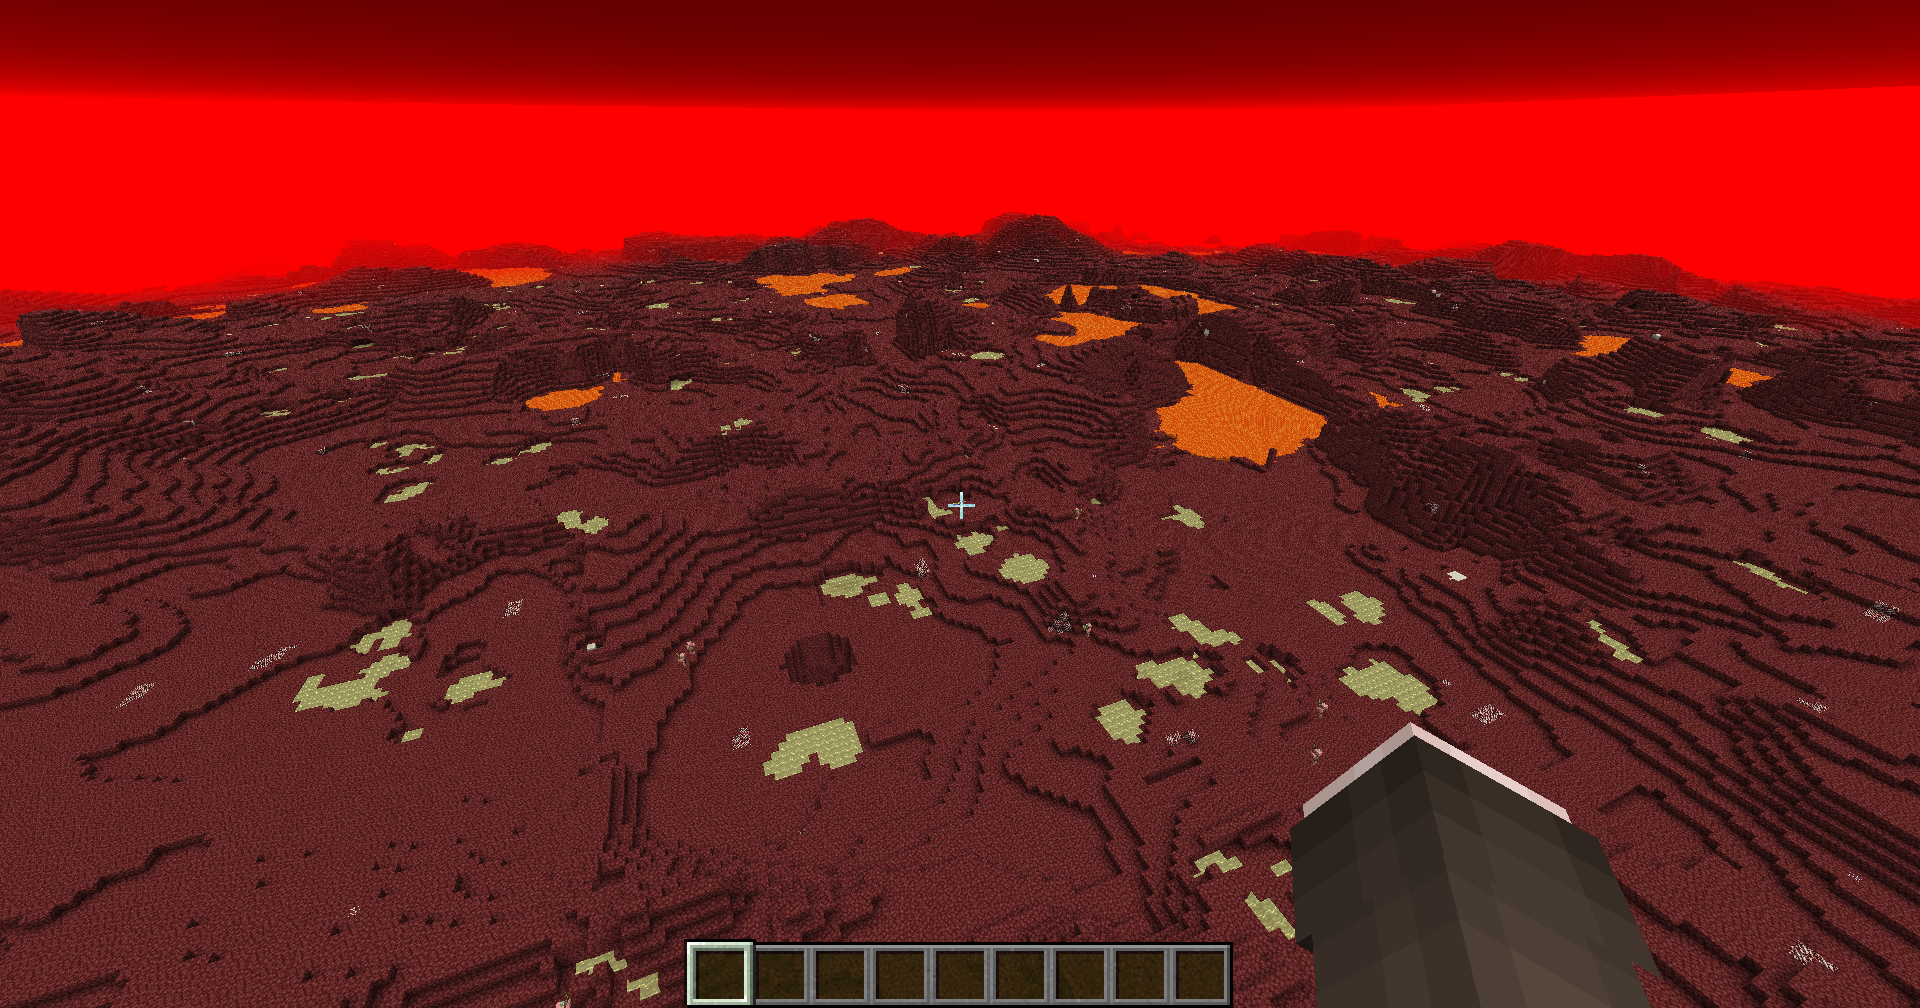 Nether surface